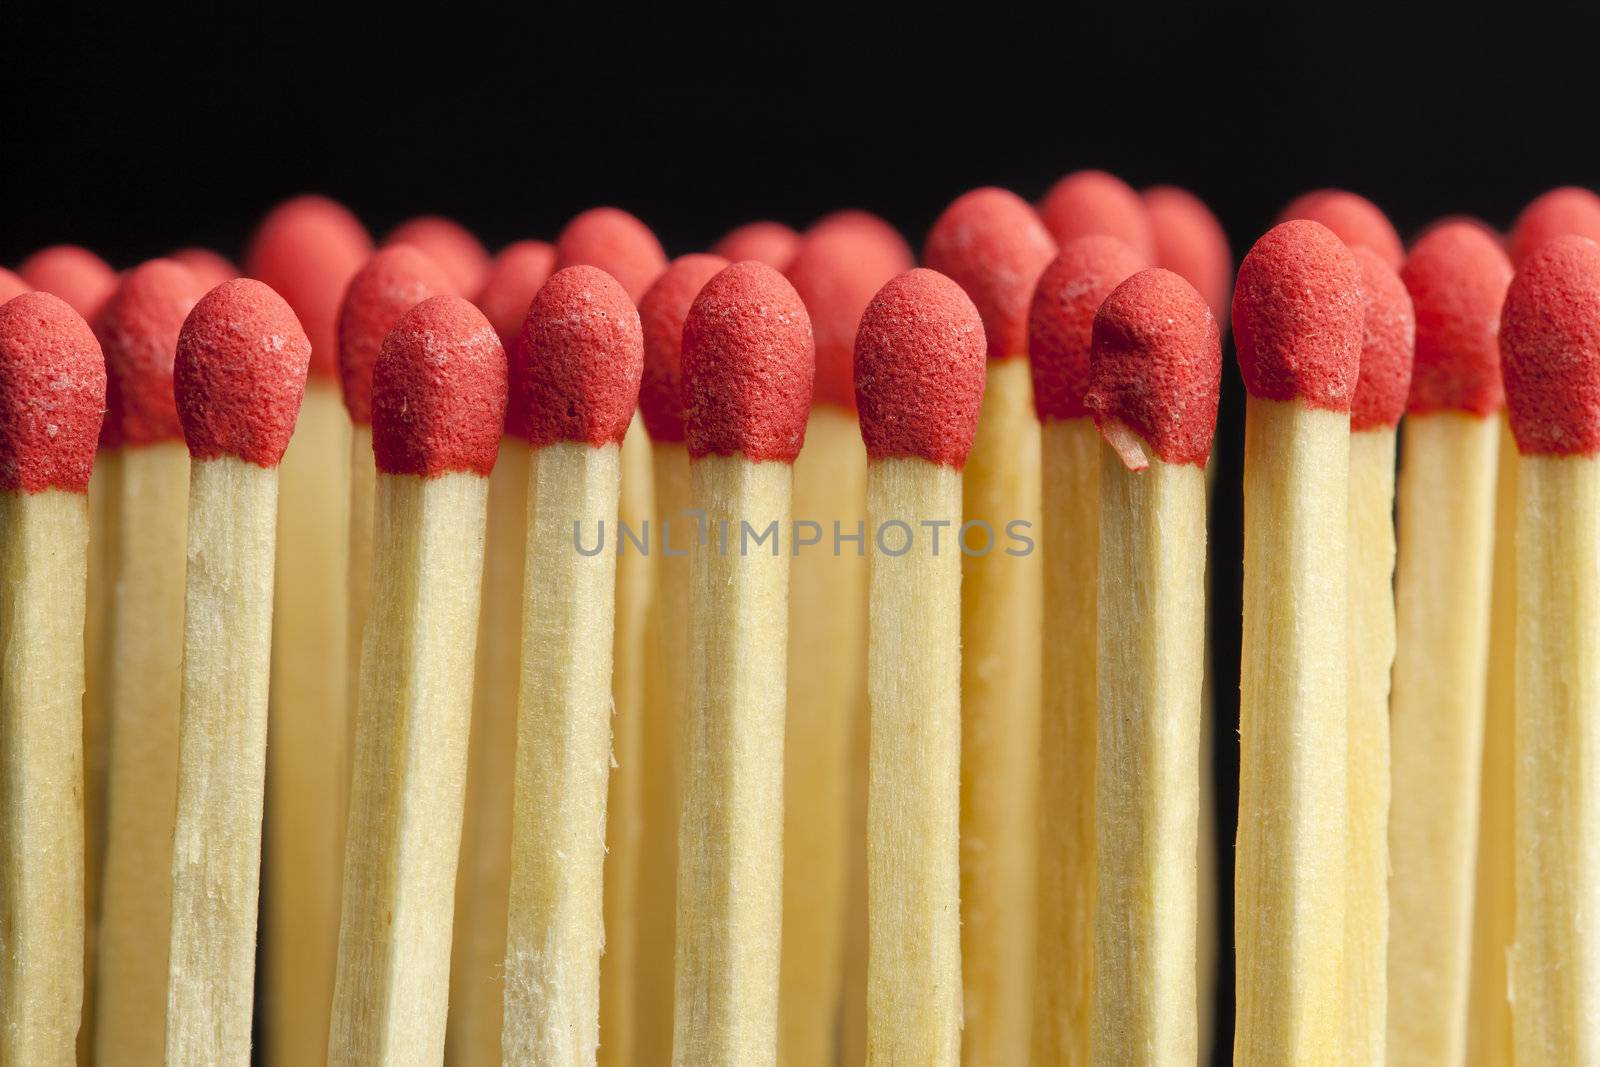 Matches in rows on a black background